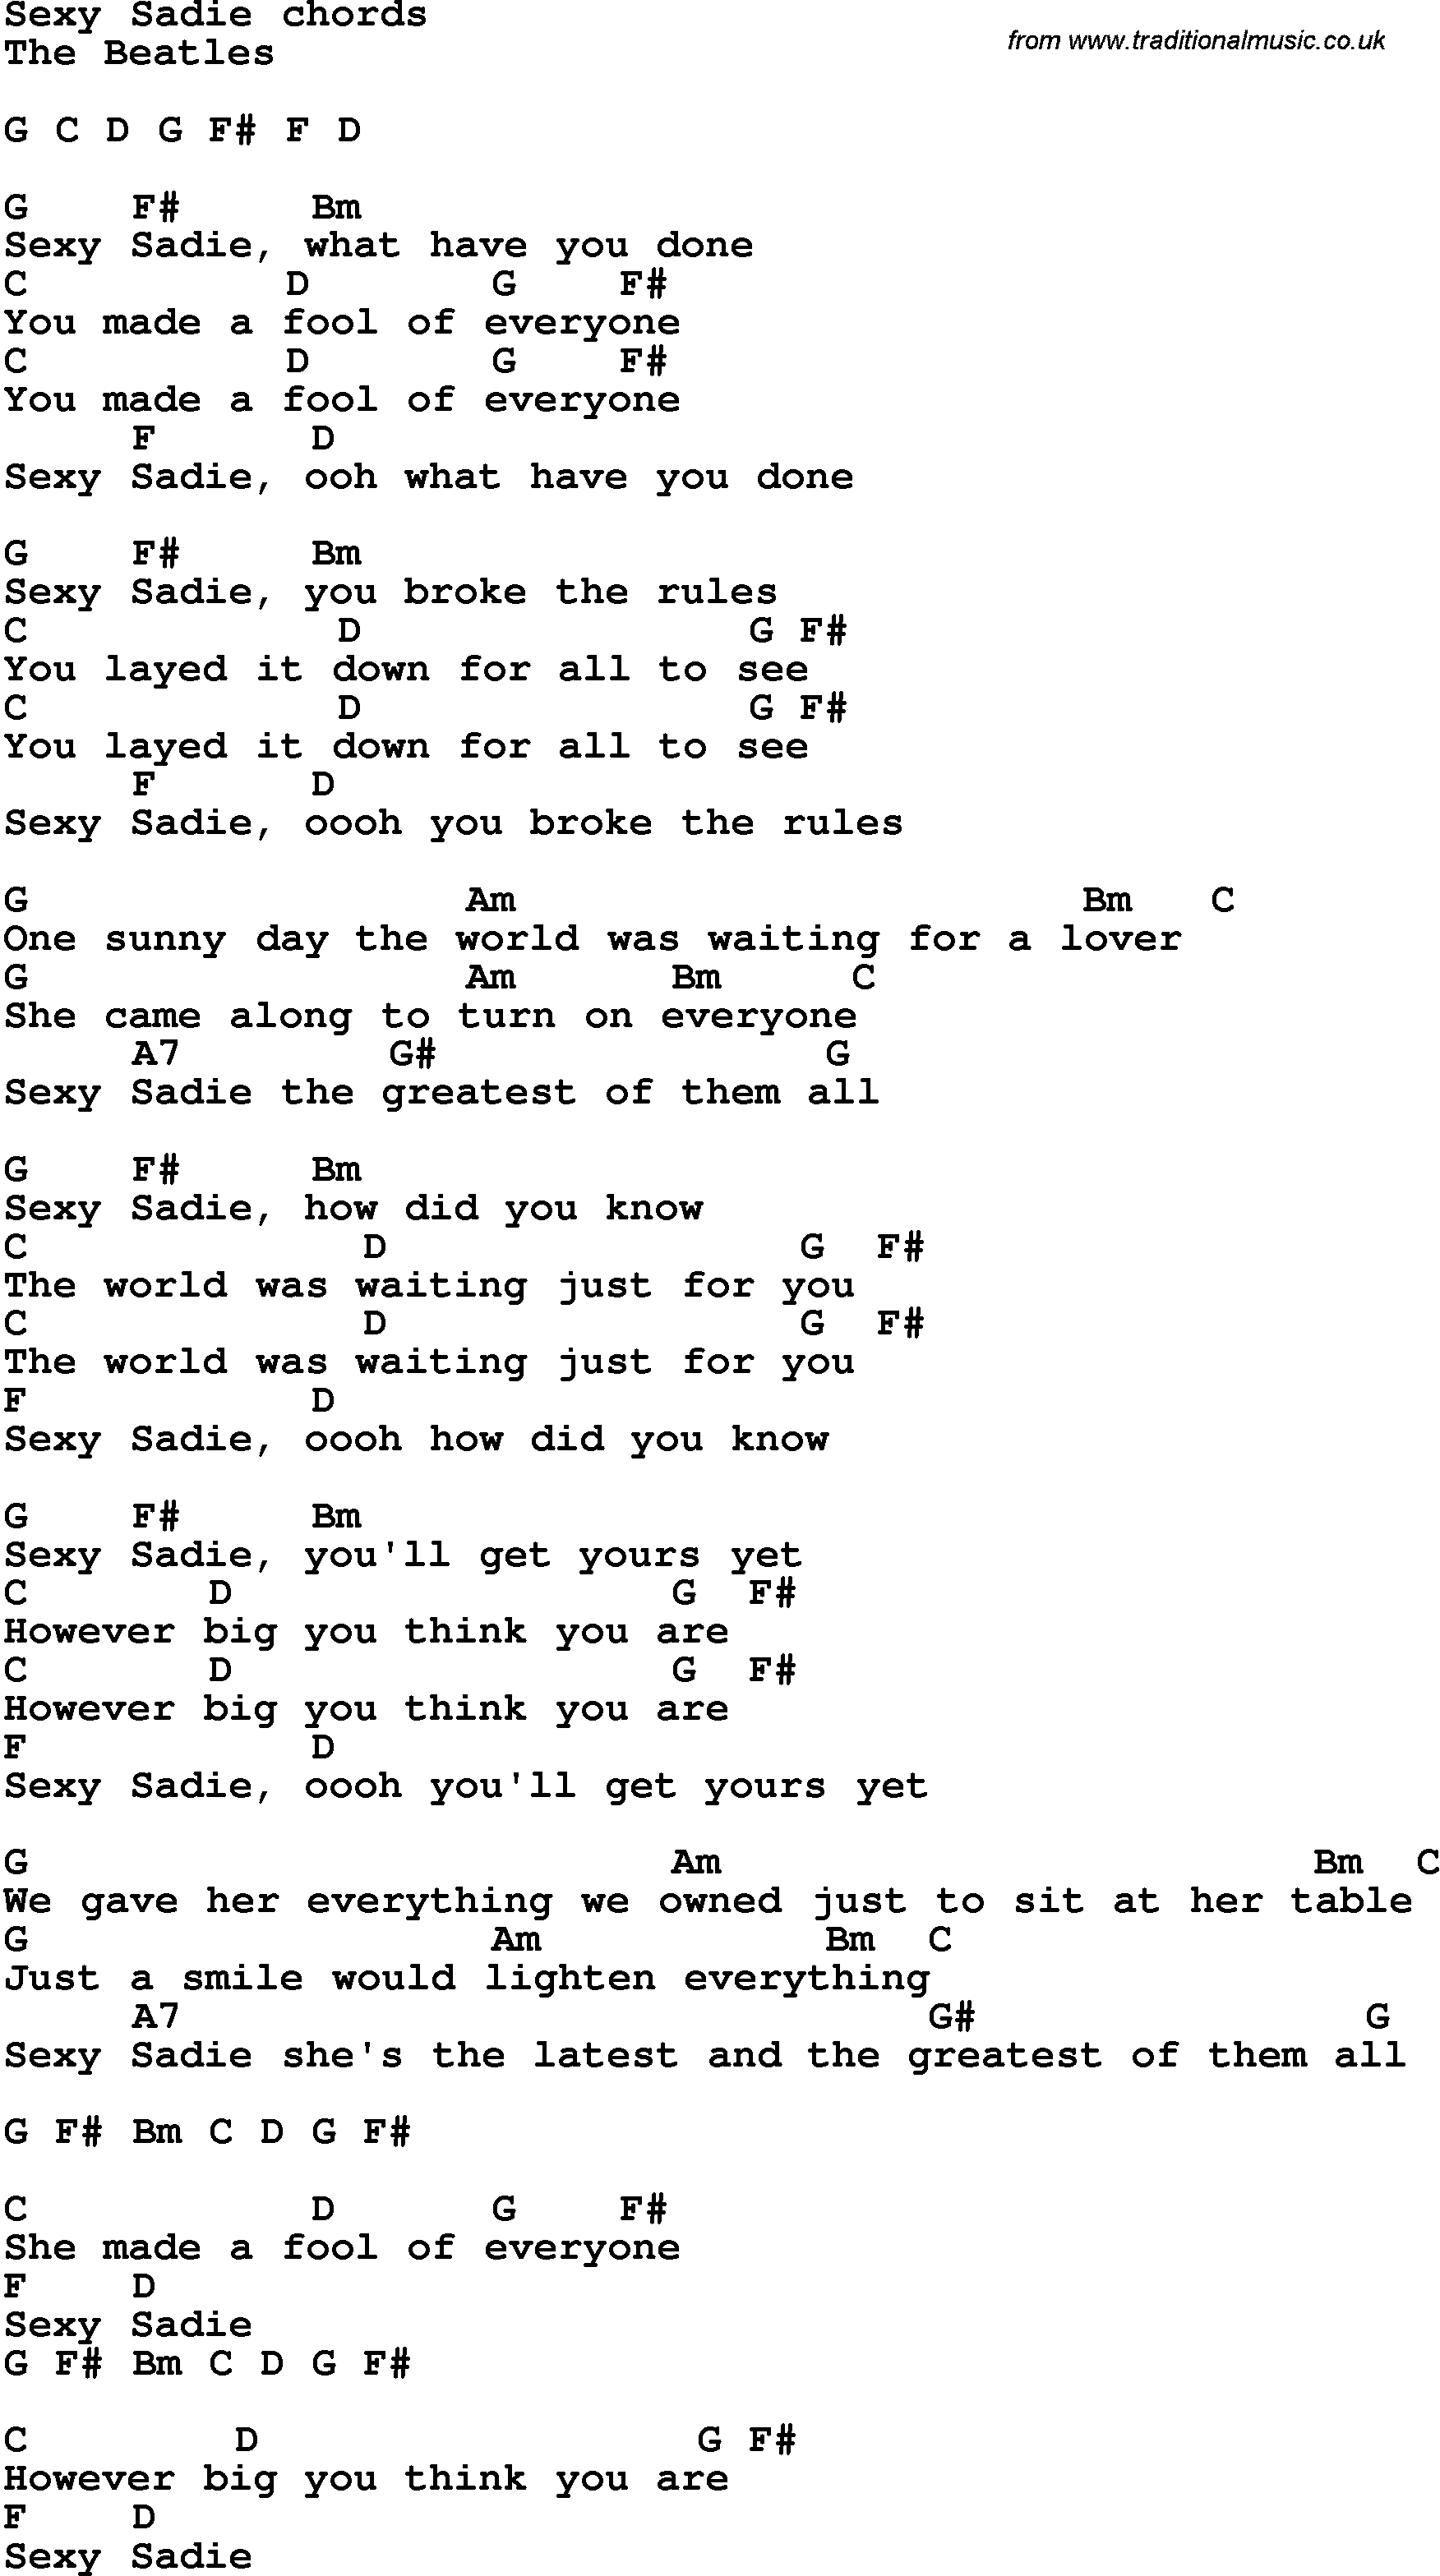 Song Lyrics with guitar chords for Sexy Sadie